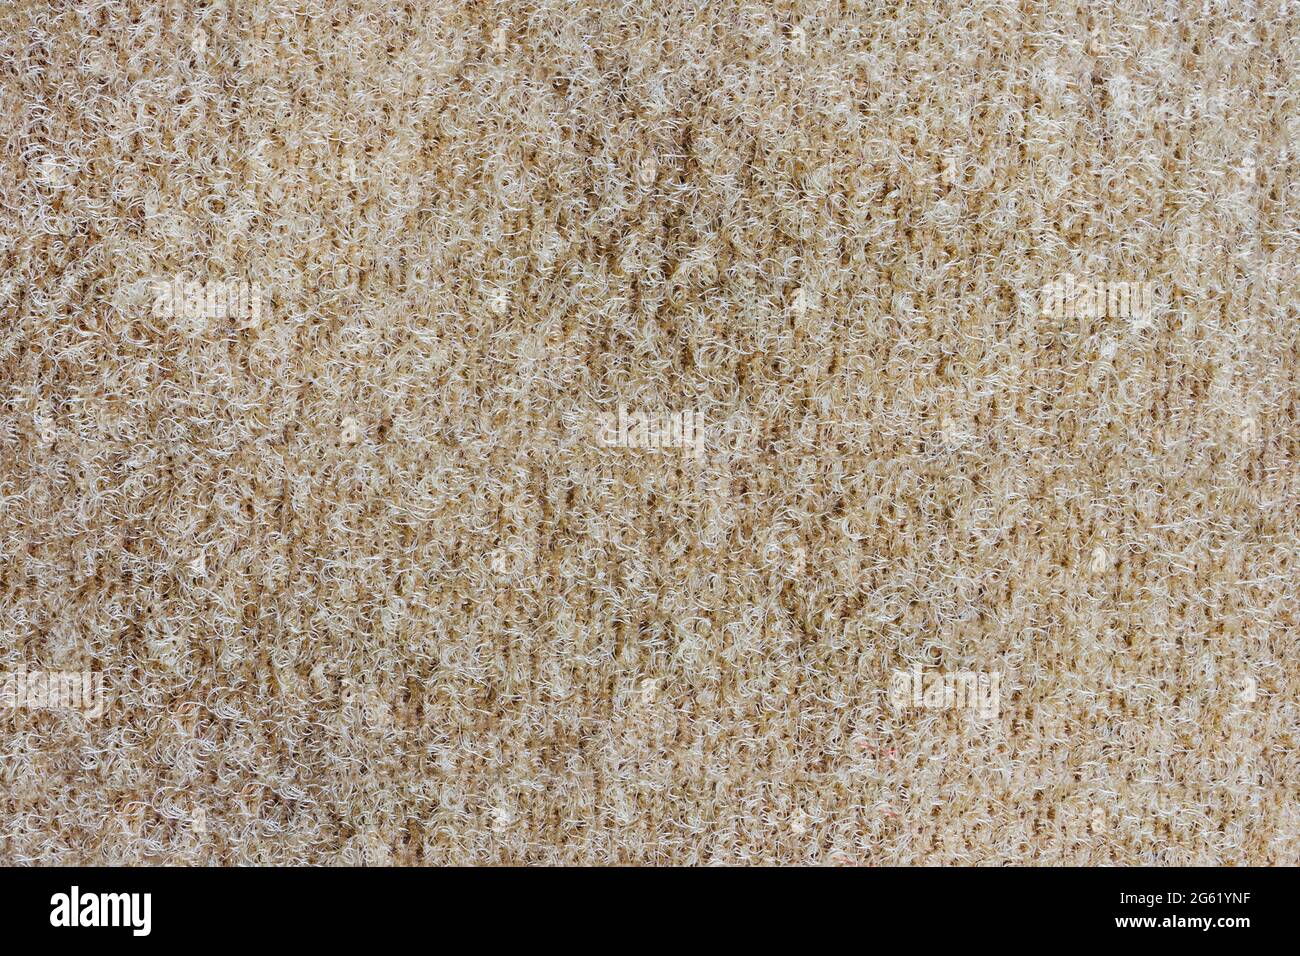 Texture close-up photo of brown colored velcro material Stock Photo - Alamy